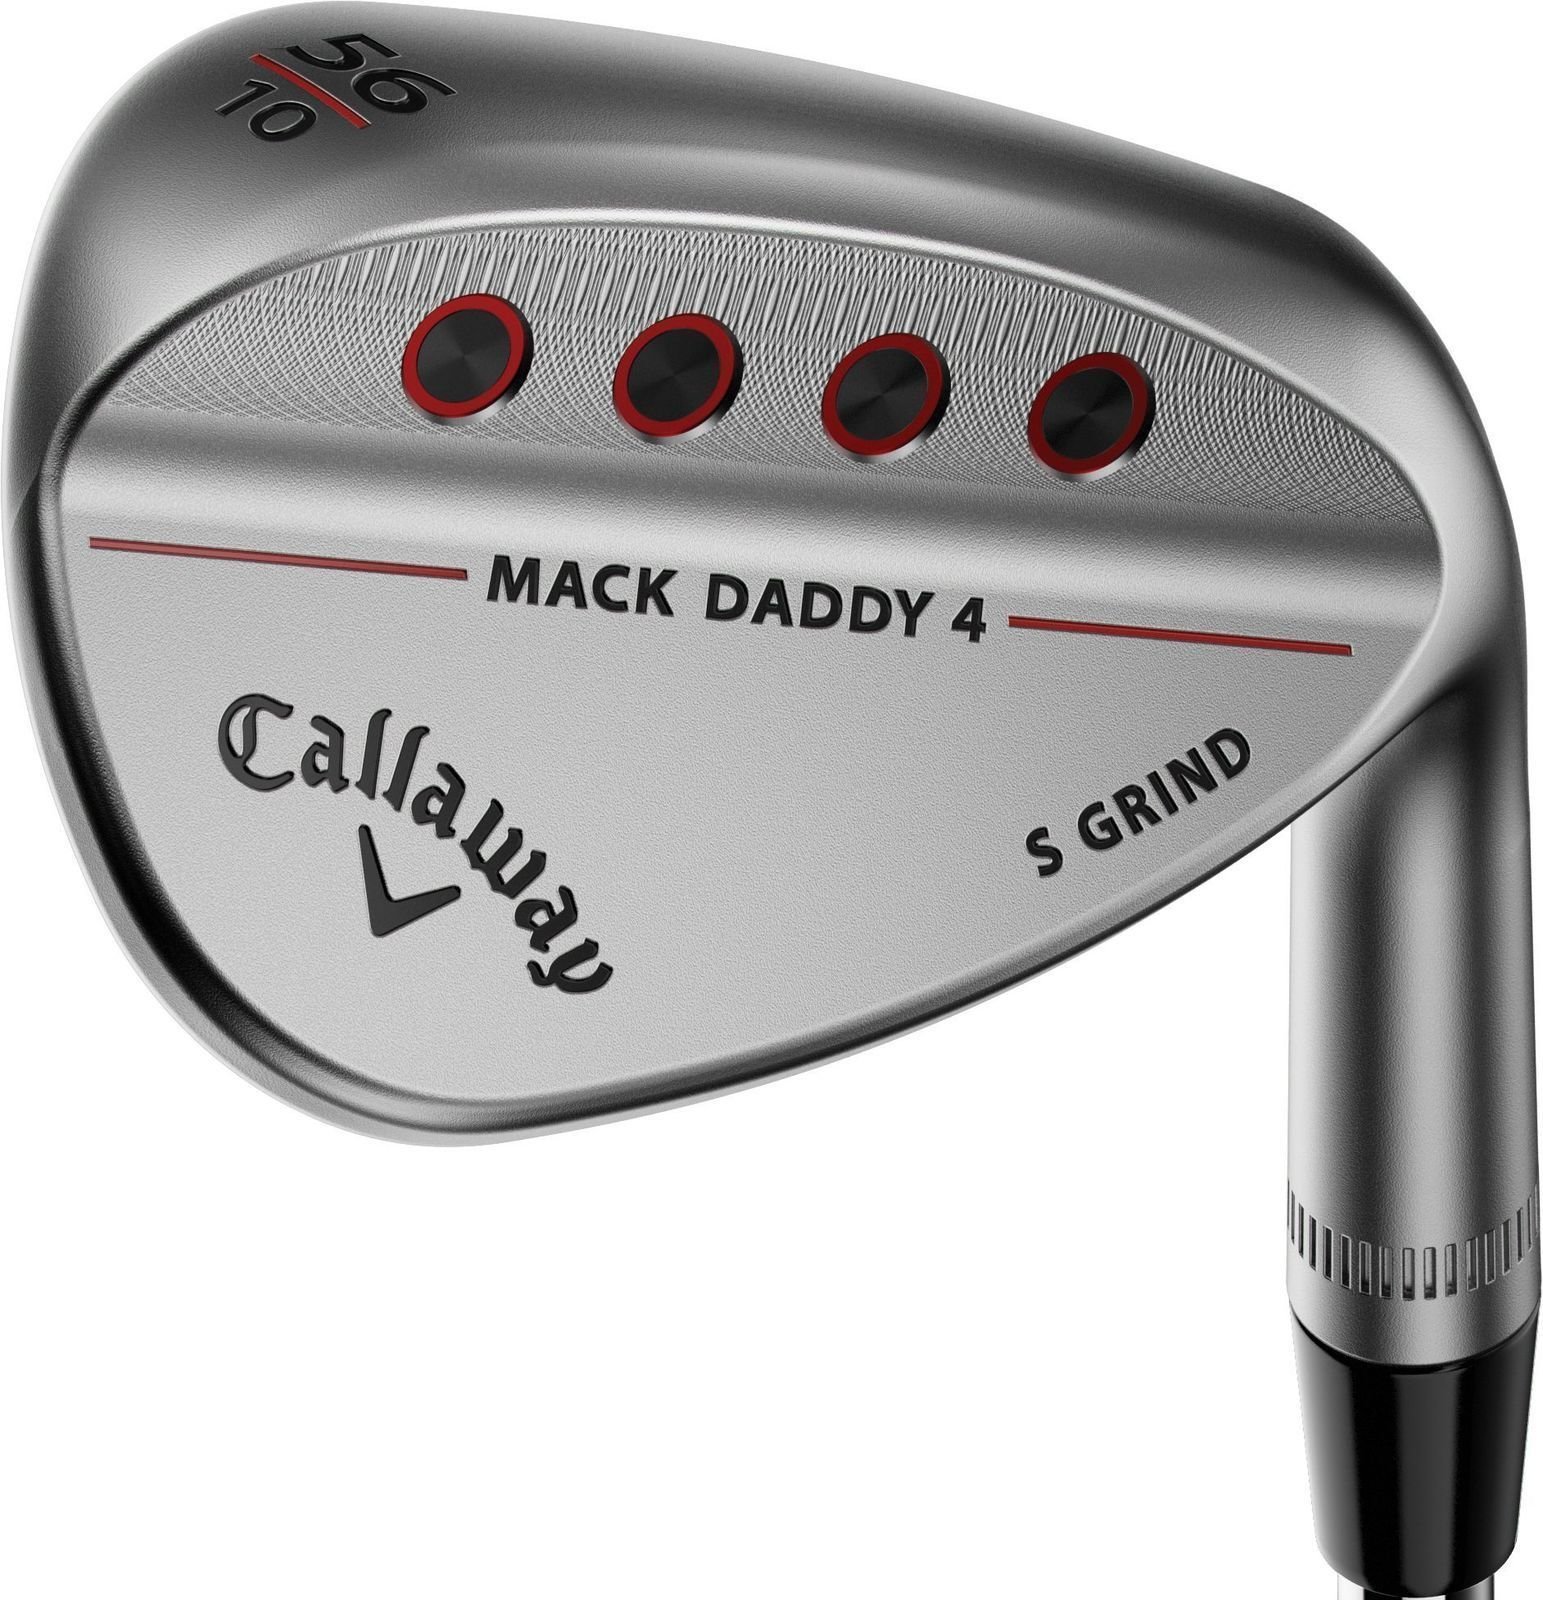 Golfkølle - Wedge Callaway Mack Daddy 4 Chrome Wedge 54-10 S-Grind Right Hand